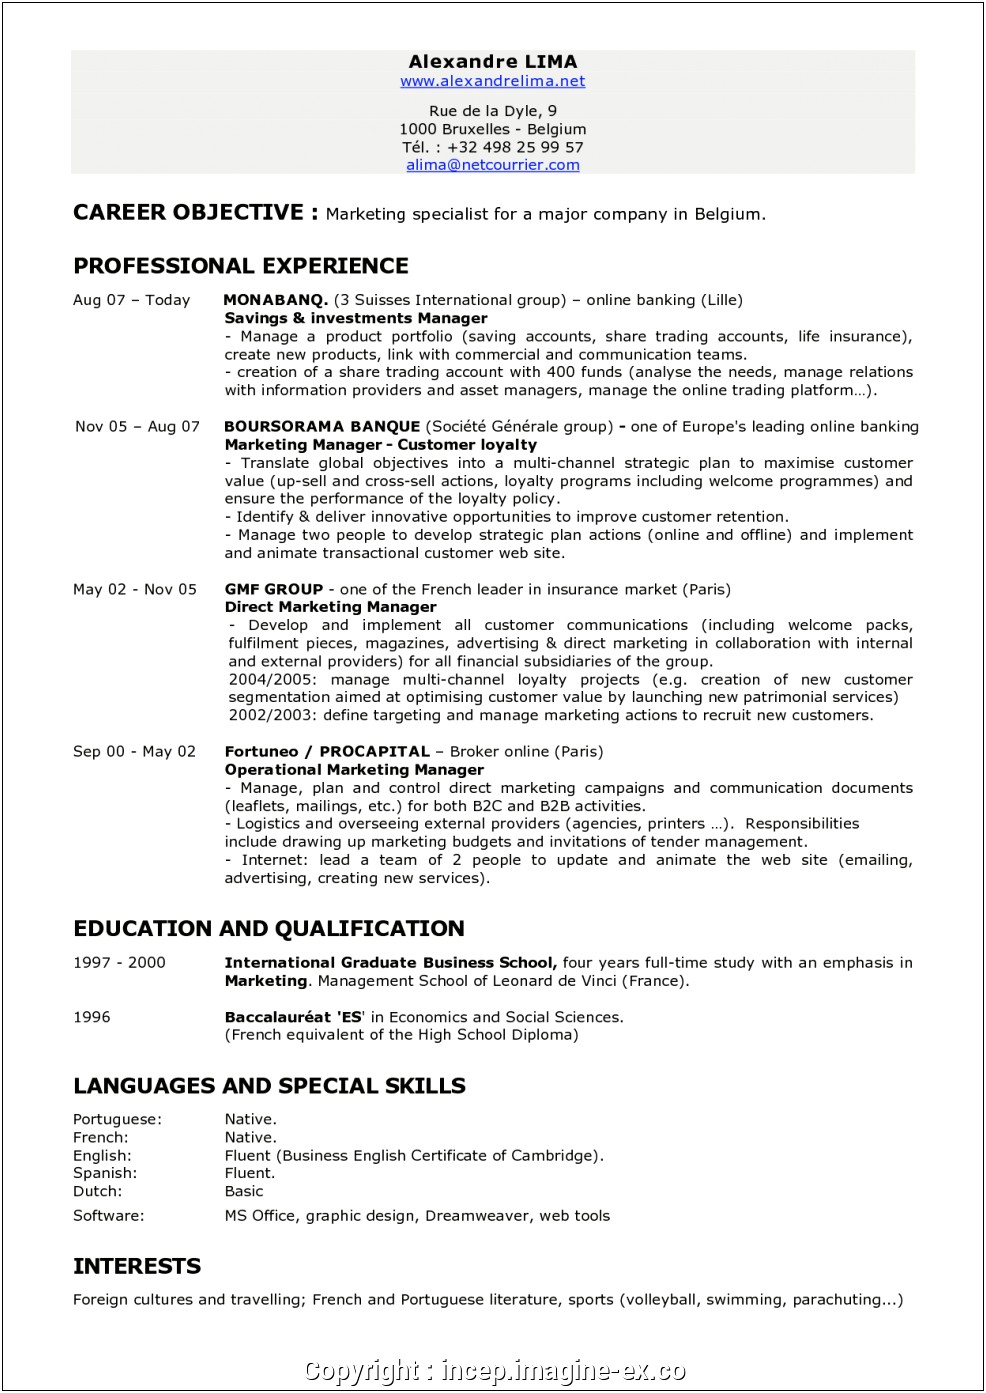 Resume Objective For Marketing Director